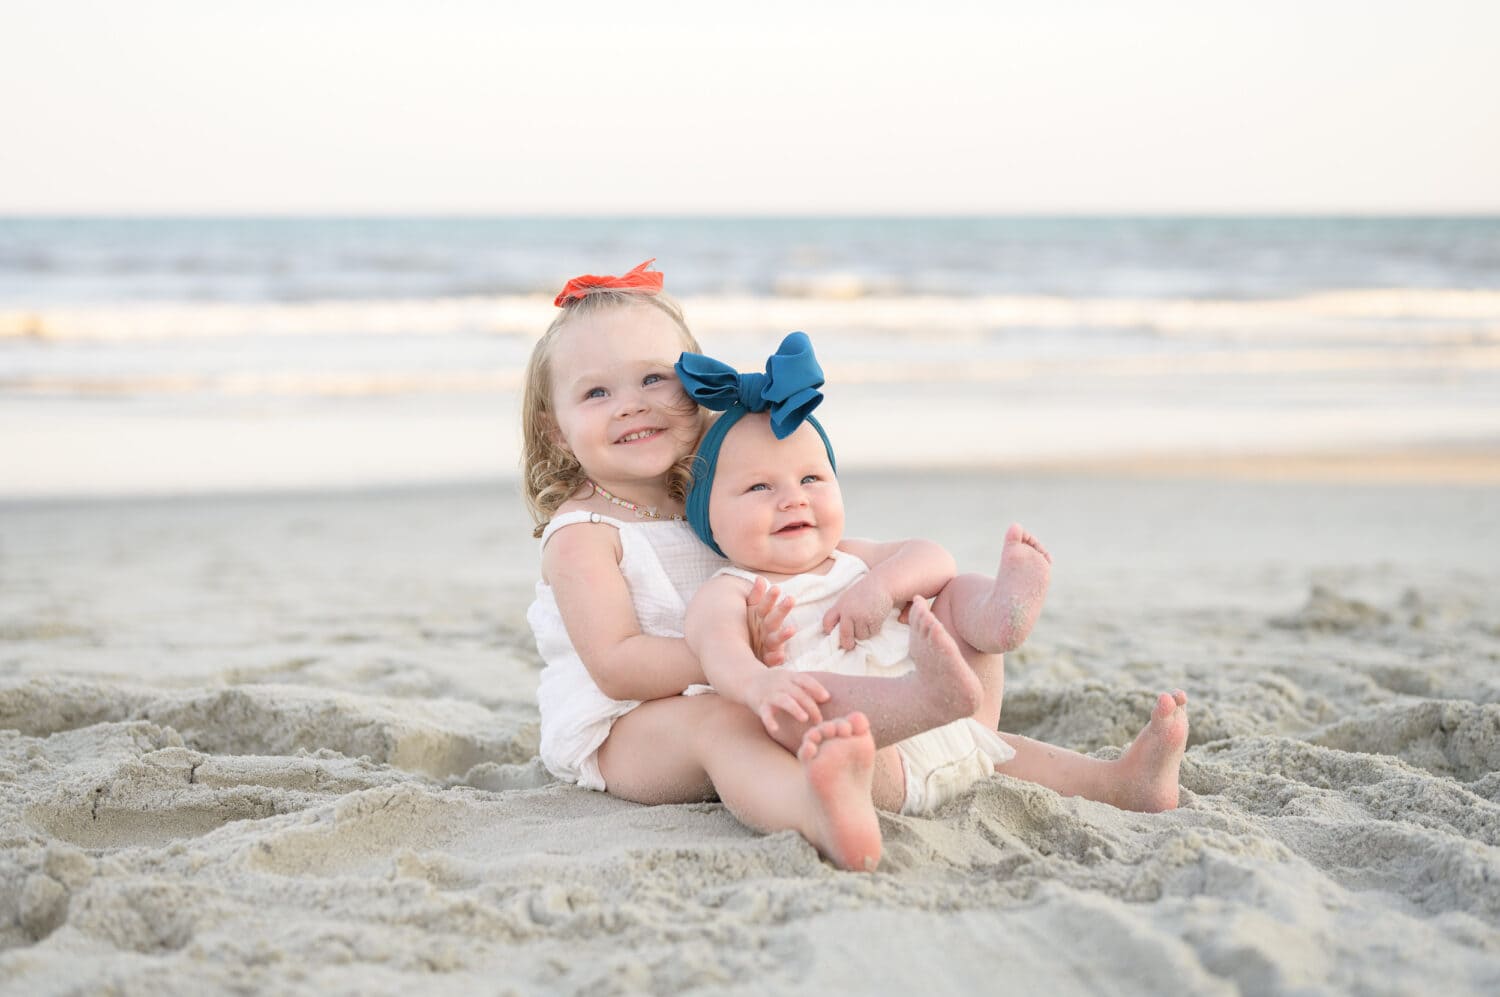 The cutest toddlers ever laying by the ocean - North Myrtle Beach